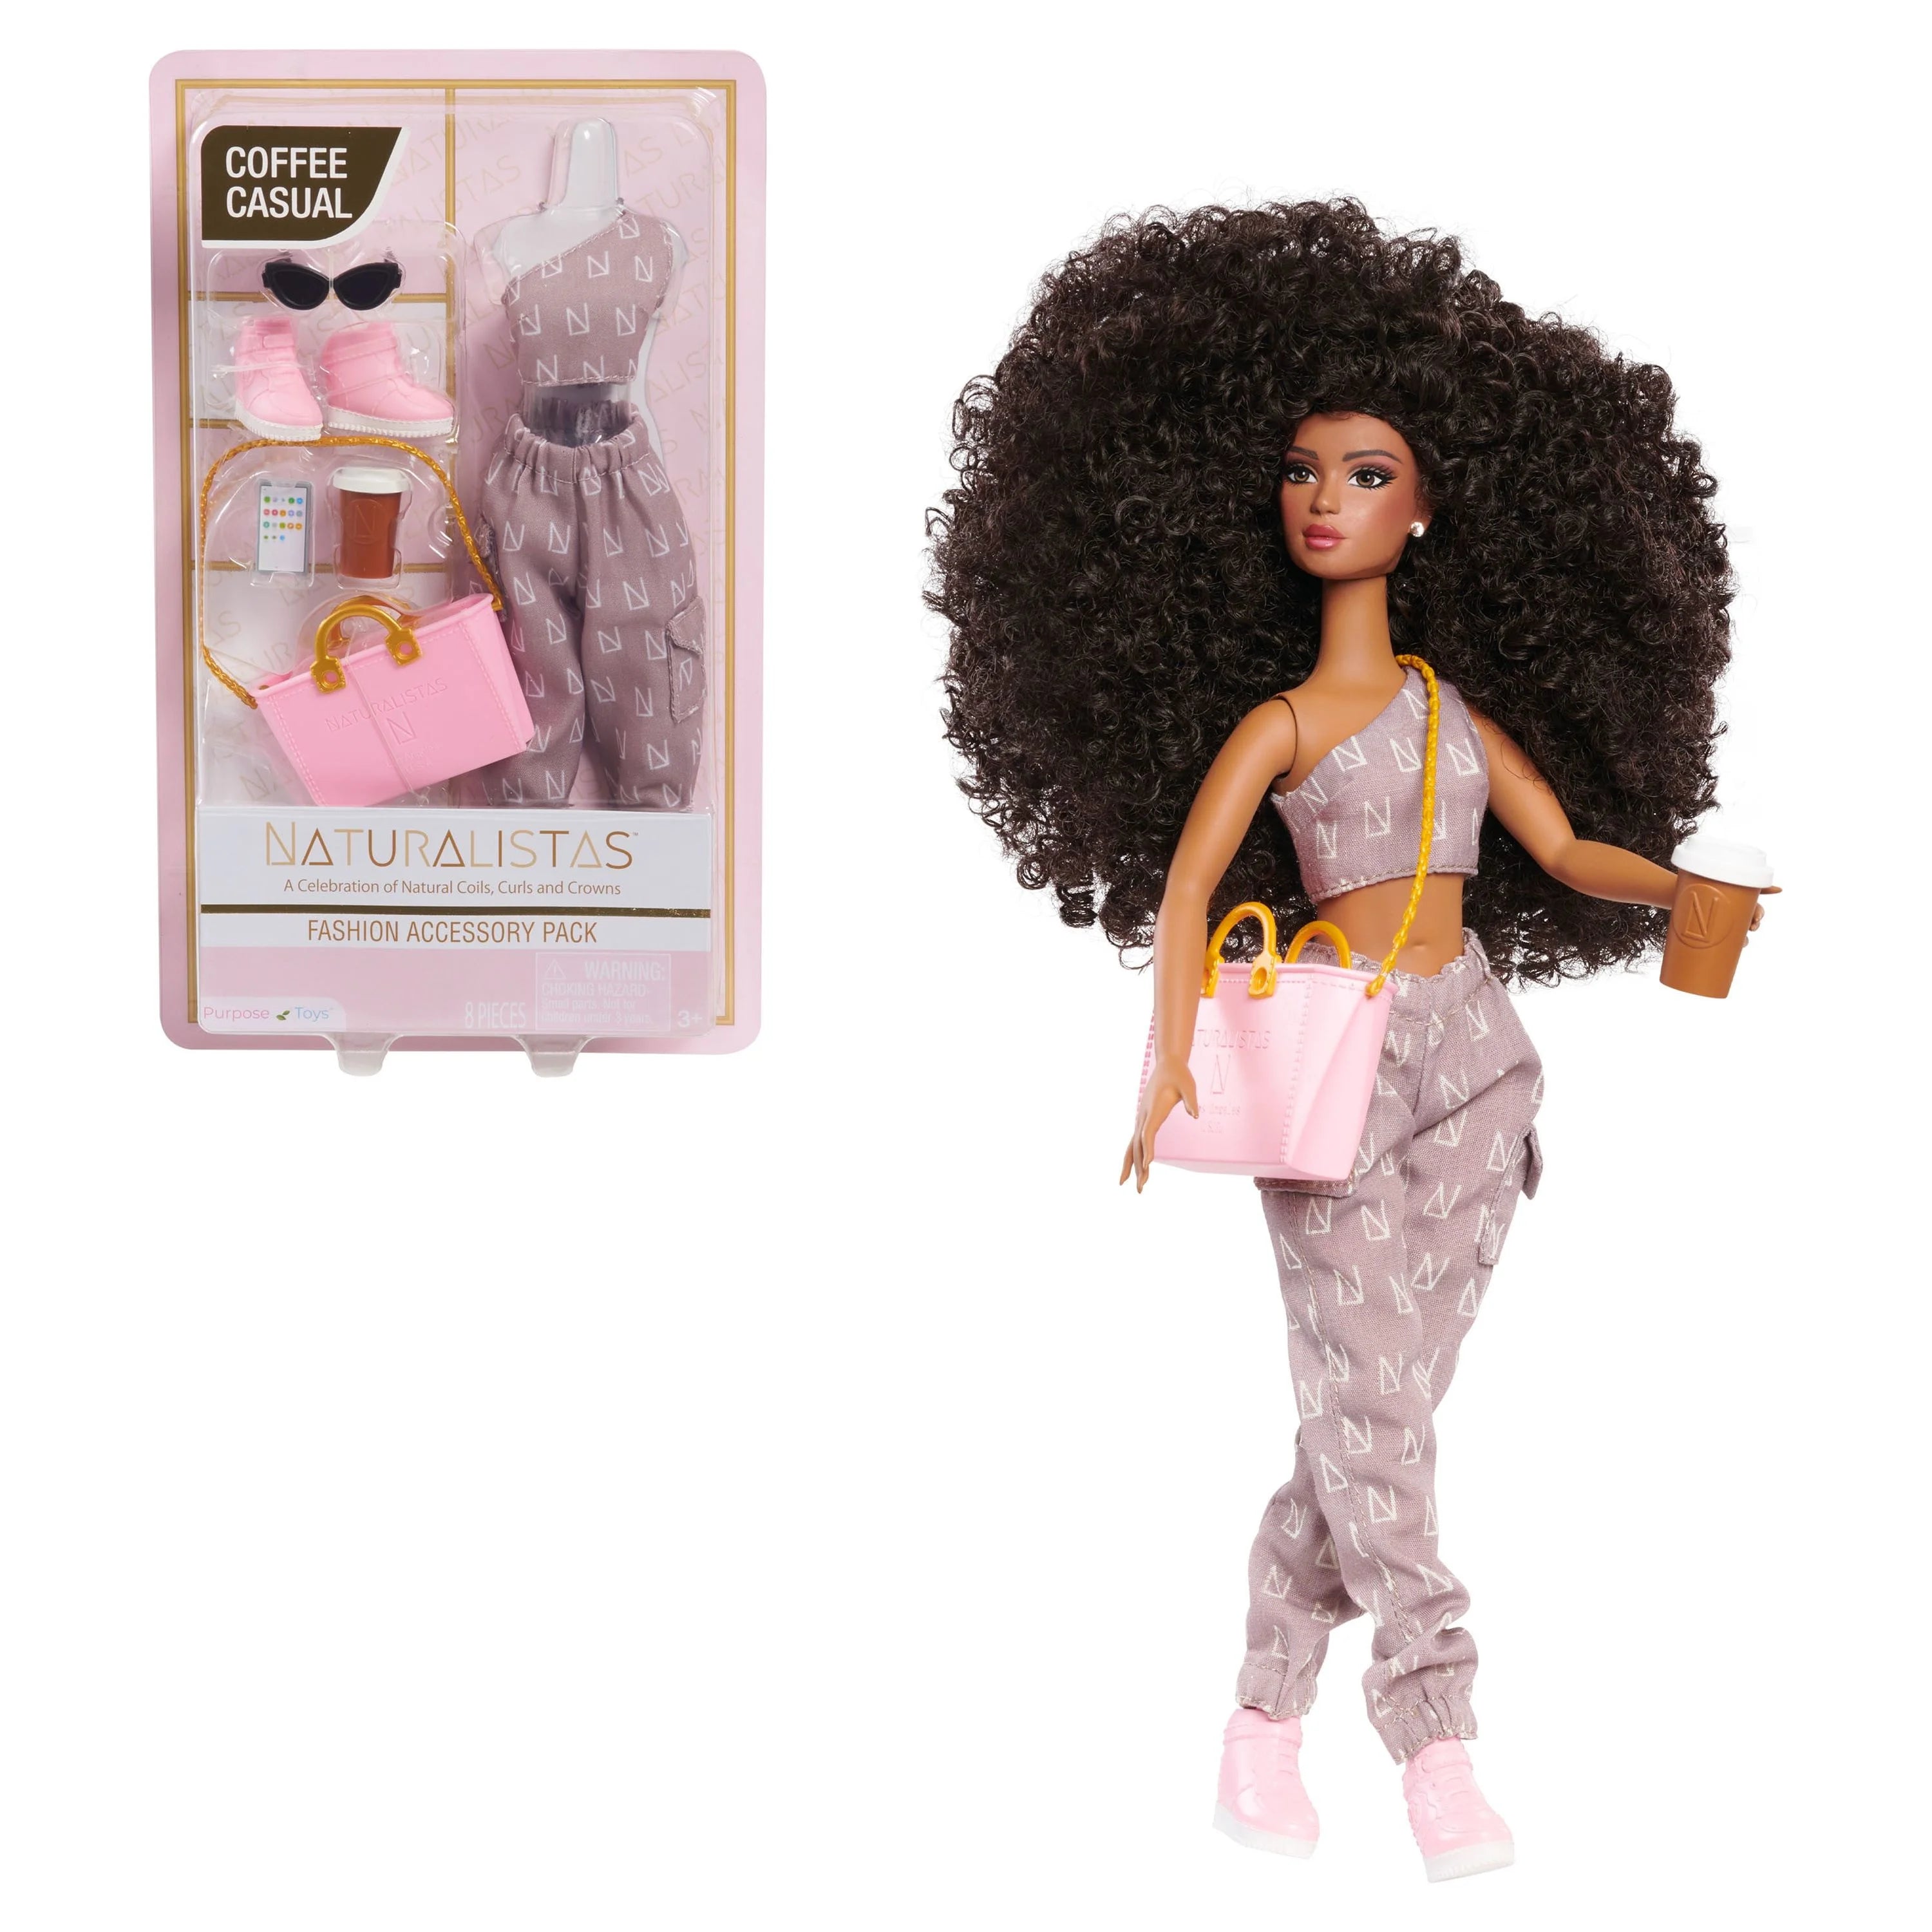 Naturalistas Fashion Pack Coffee Casual 7-Piece Outfit and Accessories Set for 11.5-Inch Tall Naturalistas Dolls, Designed and Developed by Purpose Toys